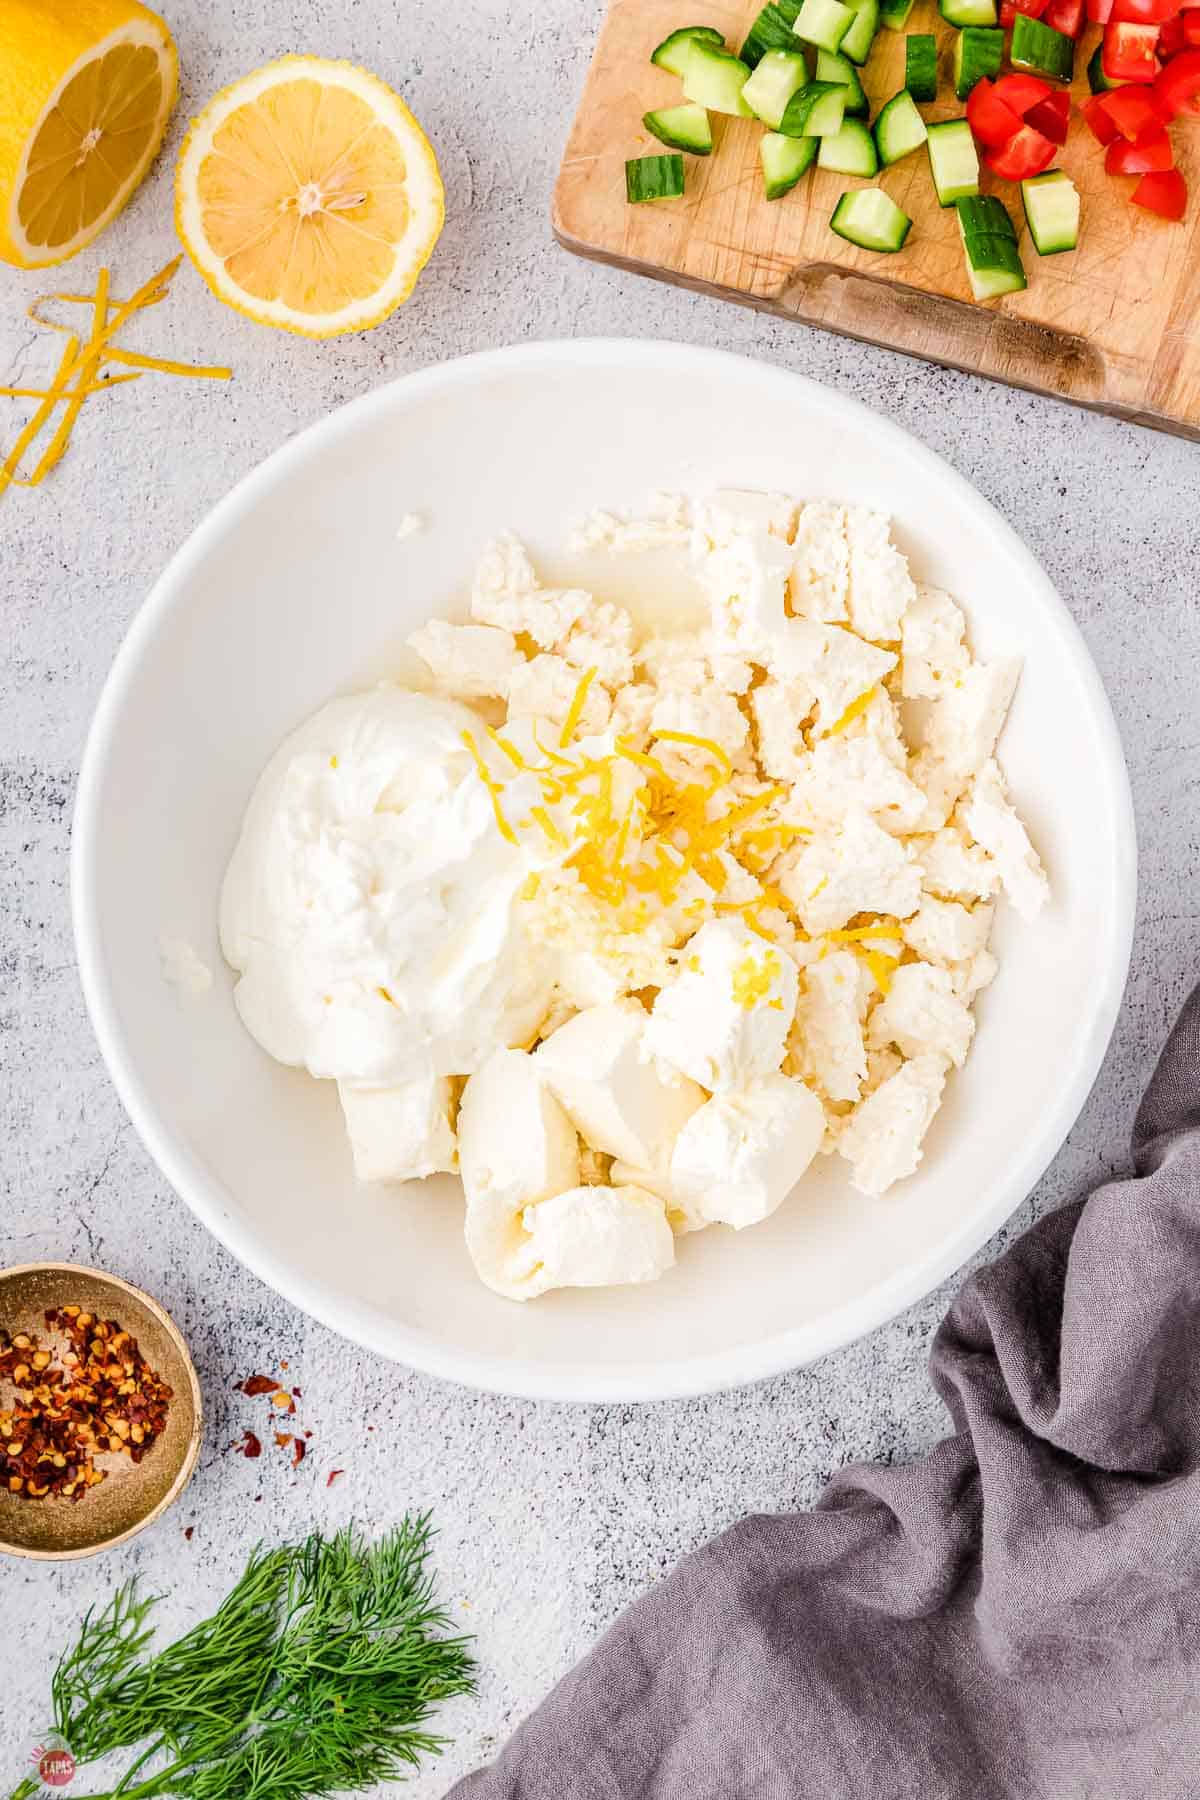 cream cheese and feta in a bowl with lemon zest